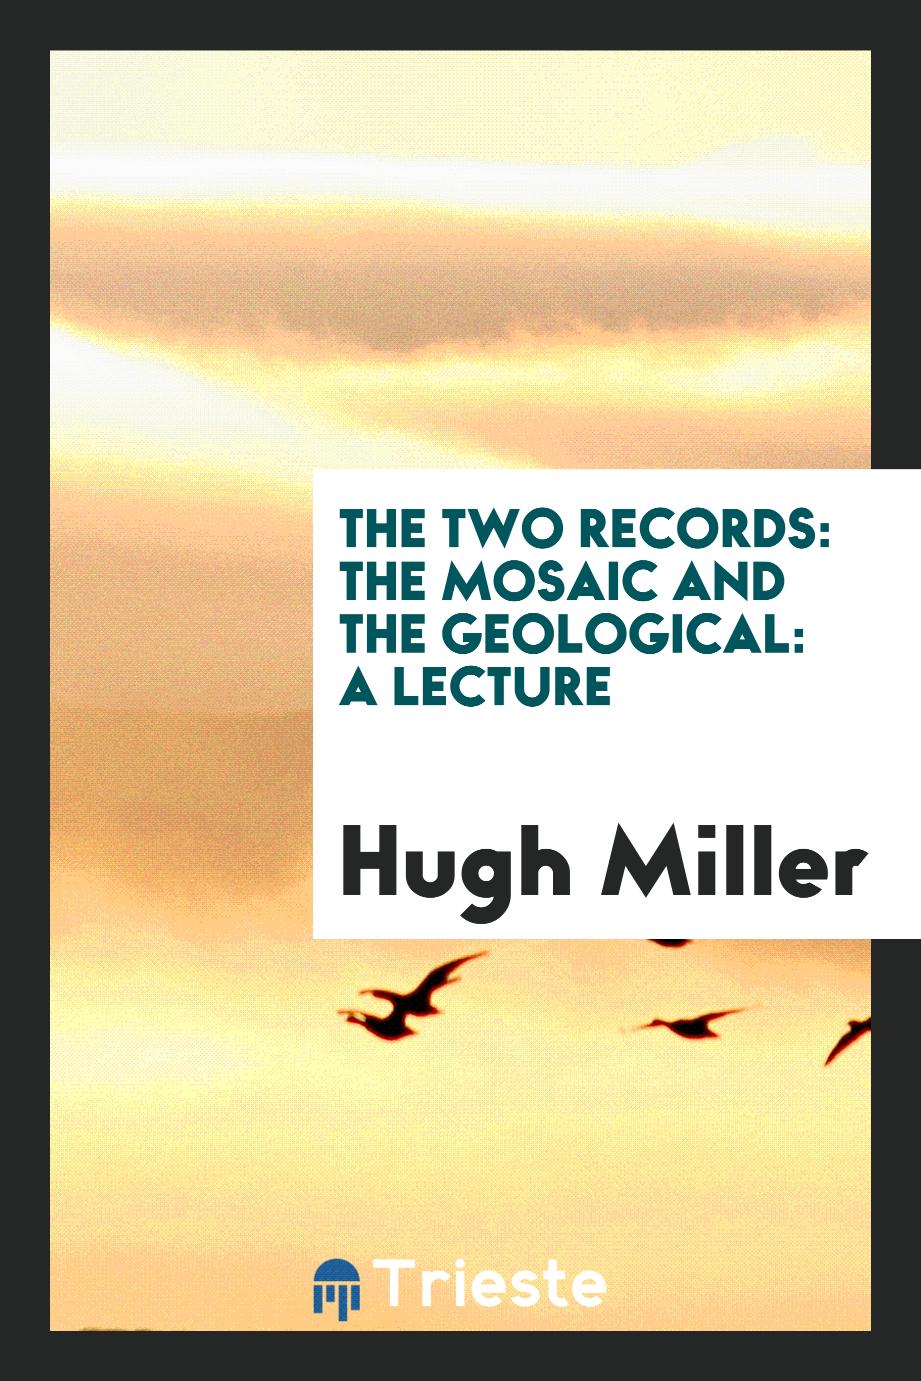 The Two Records: The Mosaic and the Geological: A Lecture